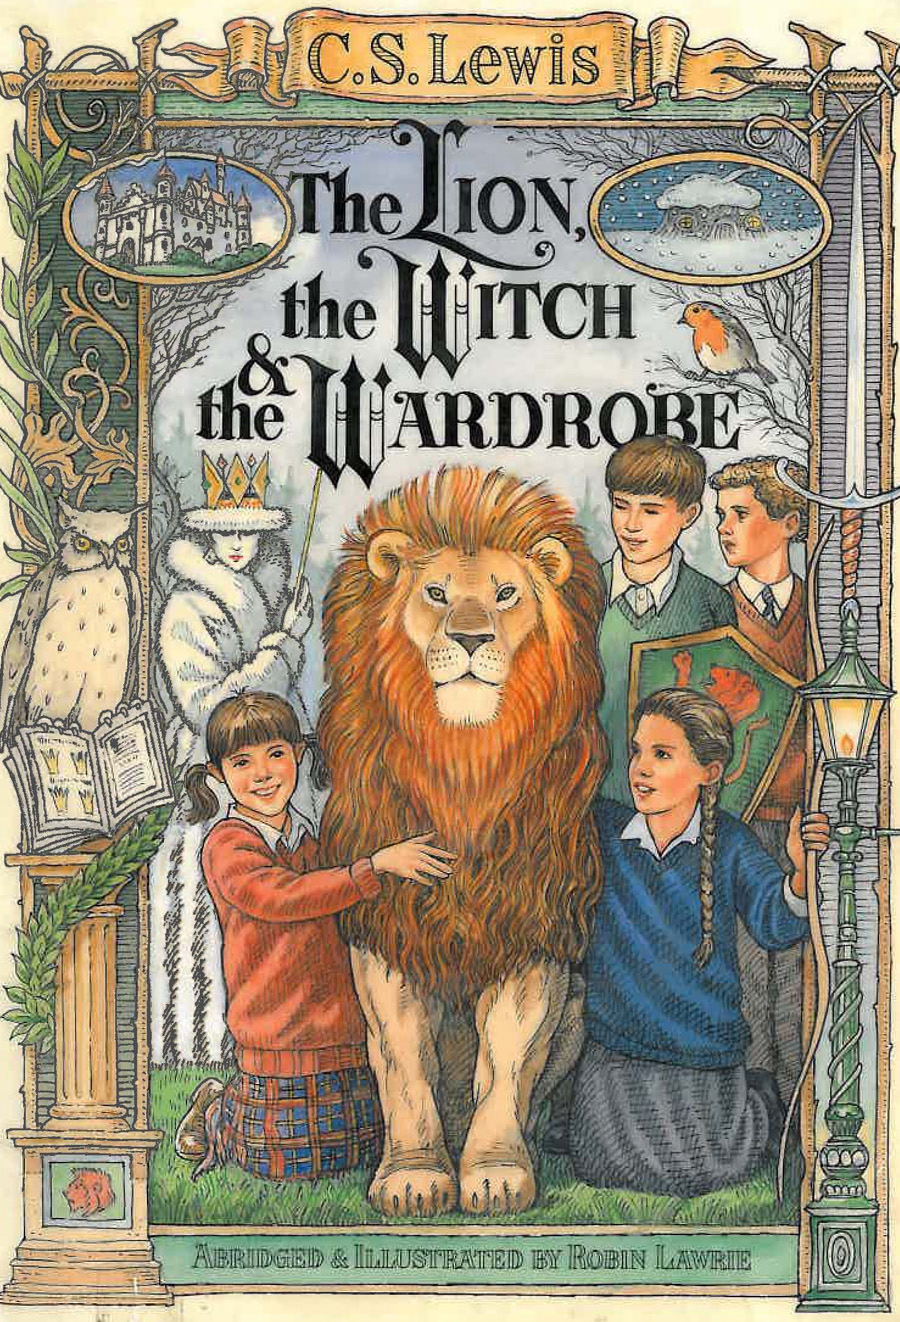 Buy The Chronicles of Narnia Characters: List of Narnian Creatures